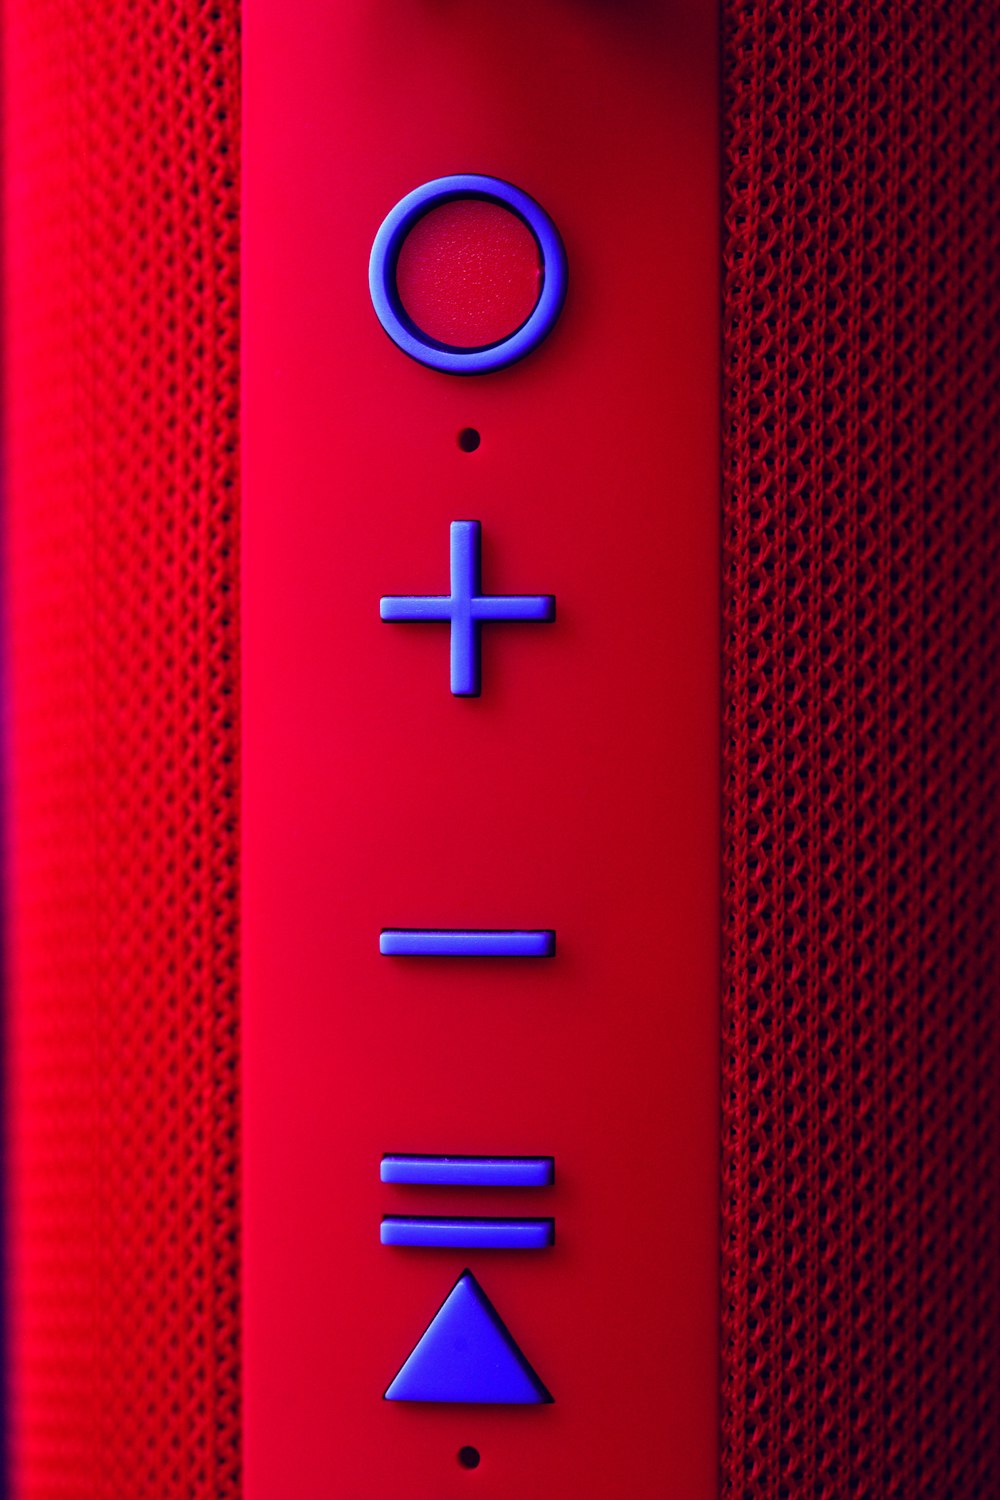 a close up of a button on a speaker